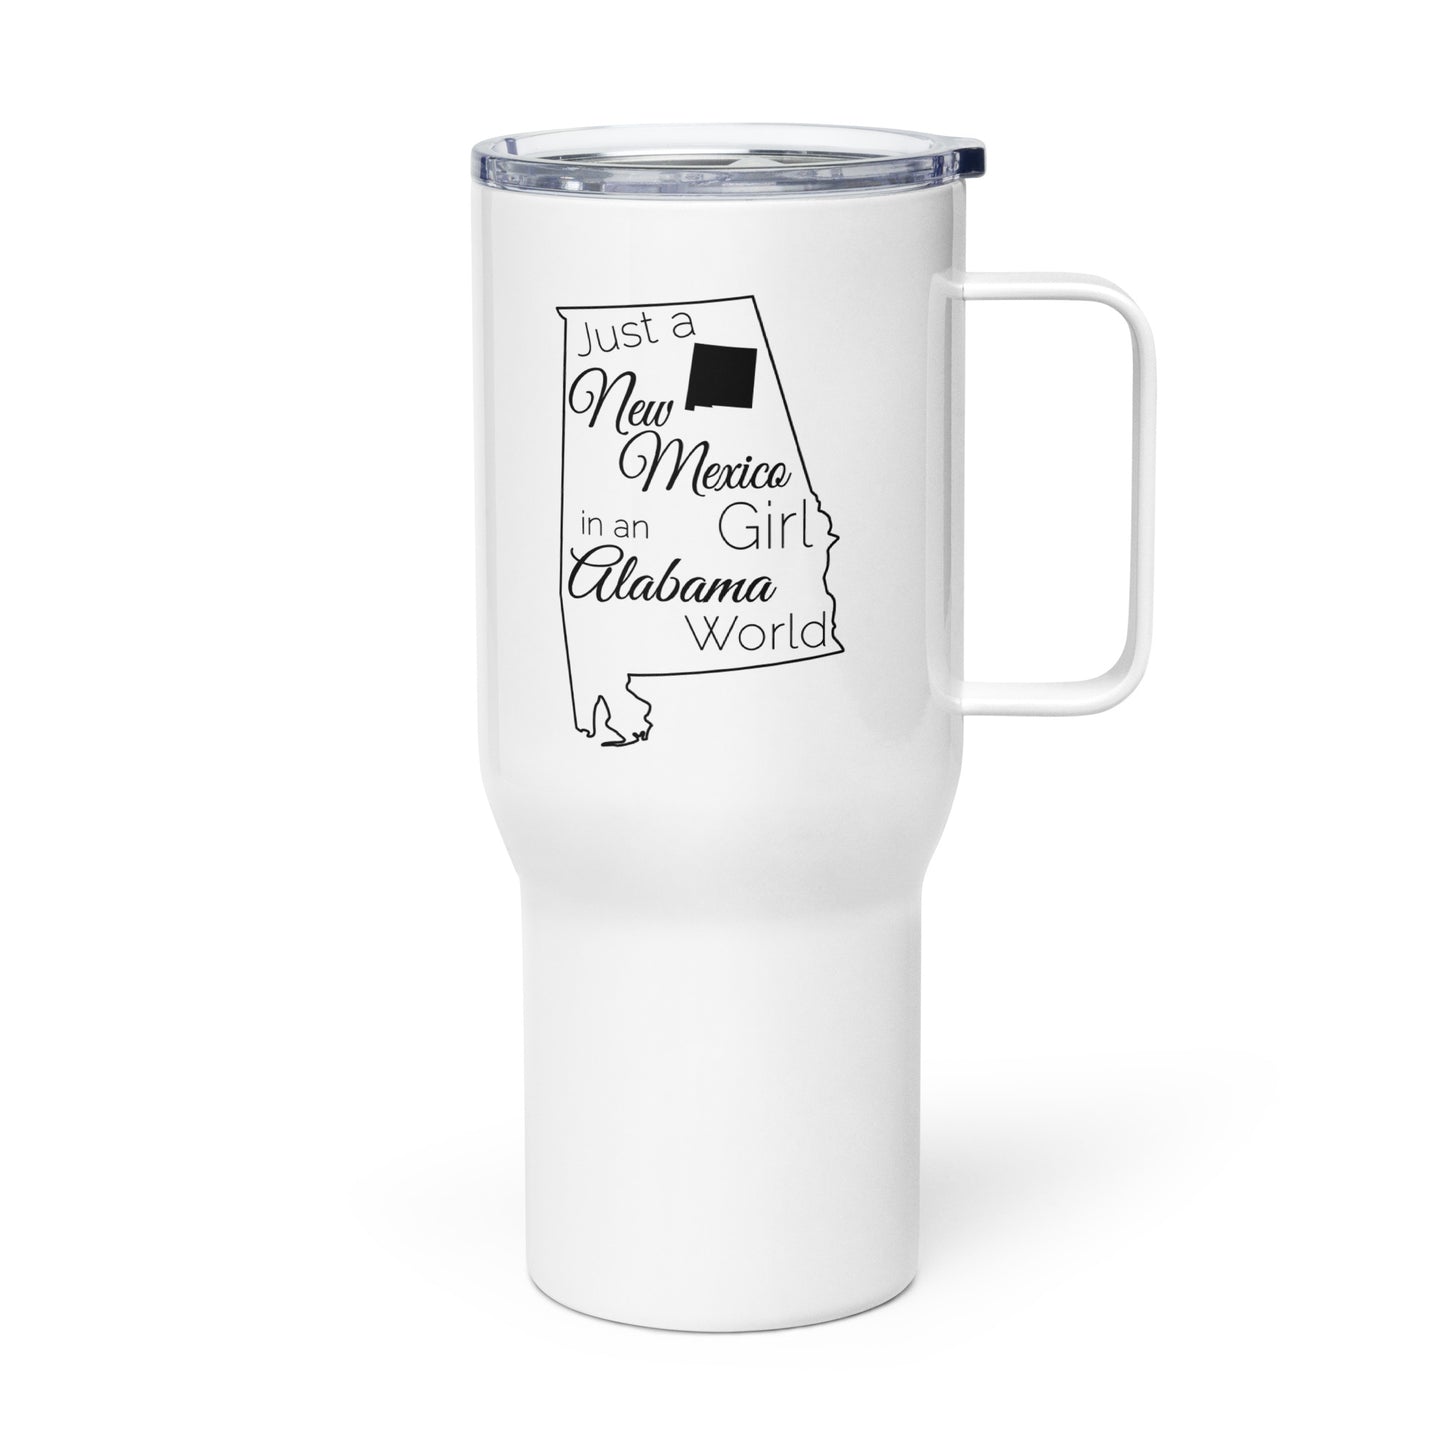 Just a New Mexico Girl in an Alabama World Travel mug with a handle